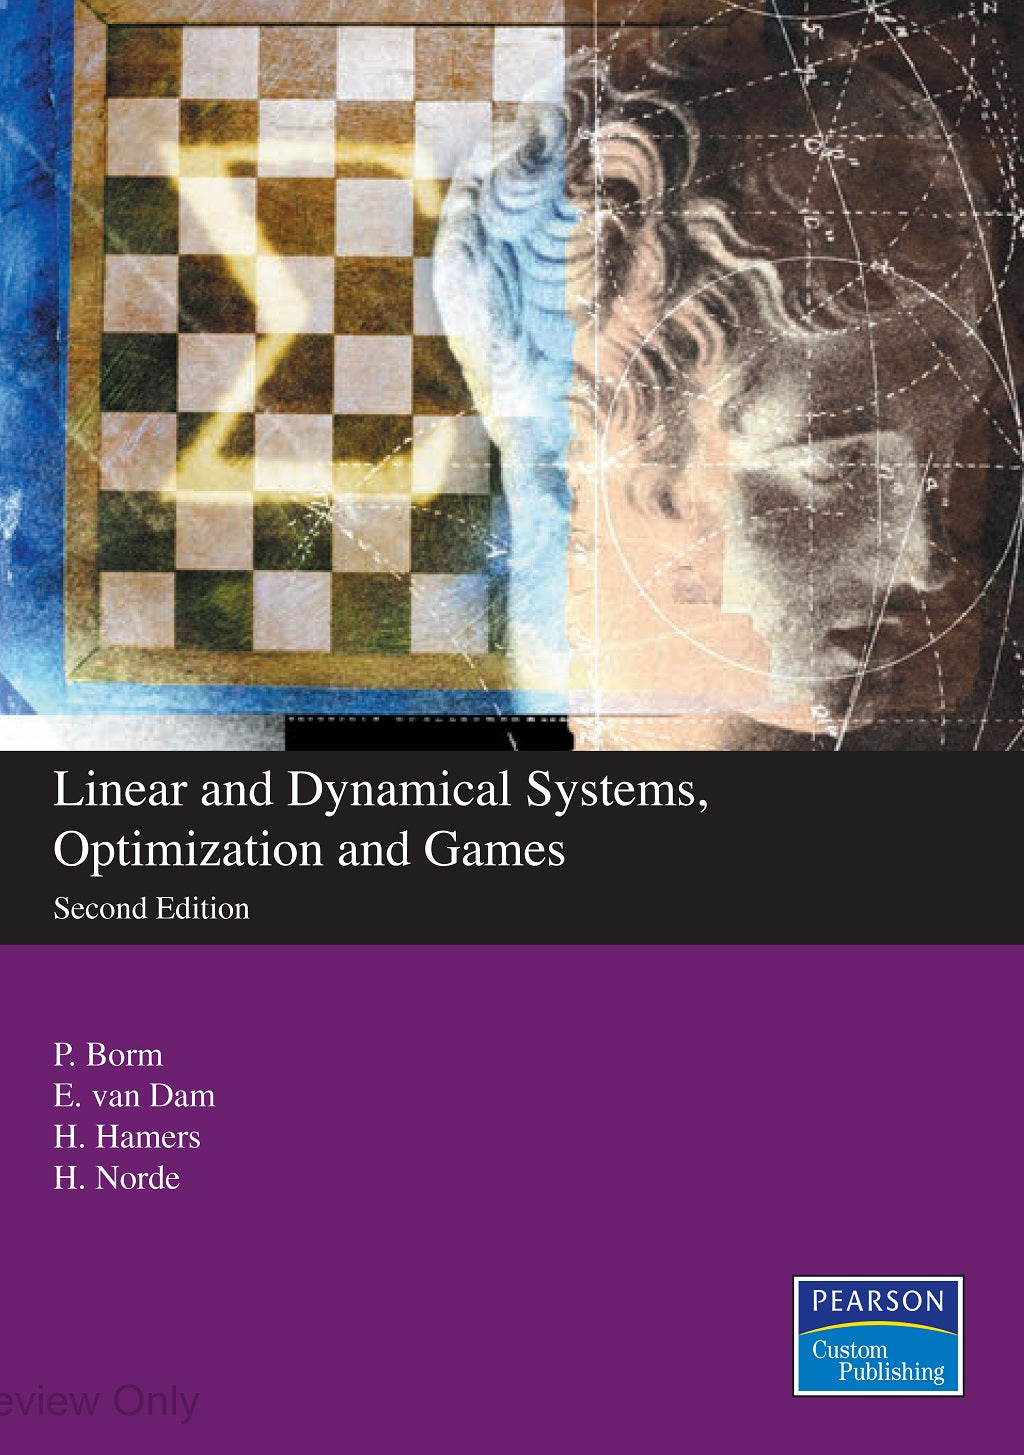 Linear and Dynamical Systems, Optimization and Games, 2nd custom edition (Print boek)